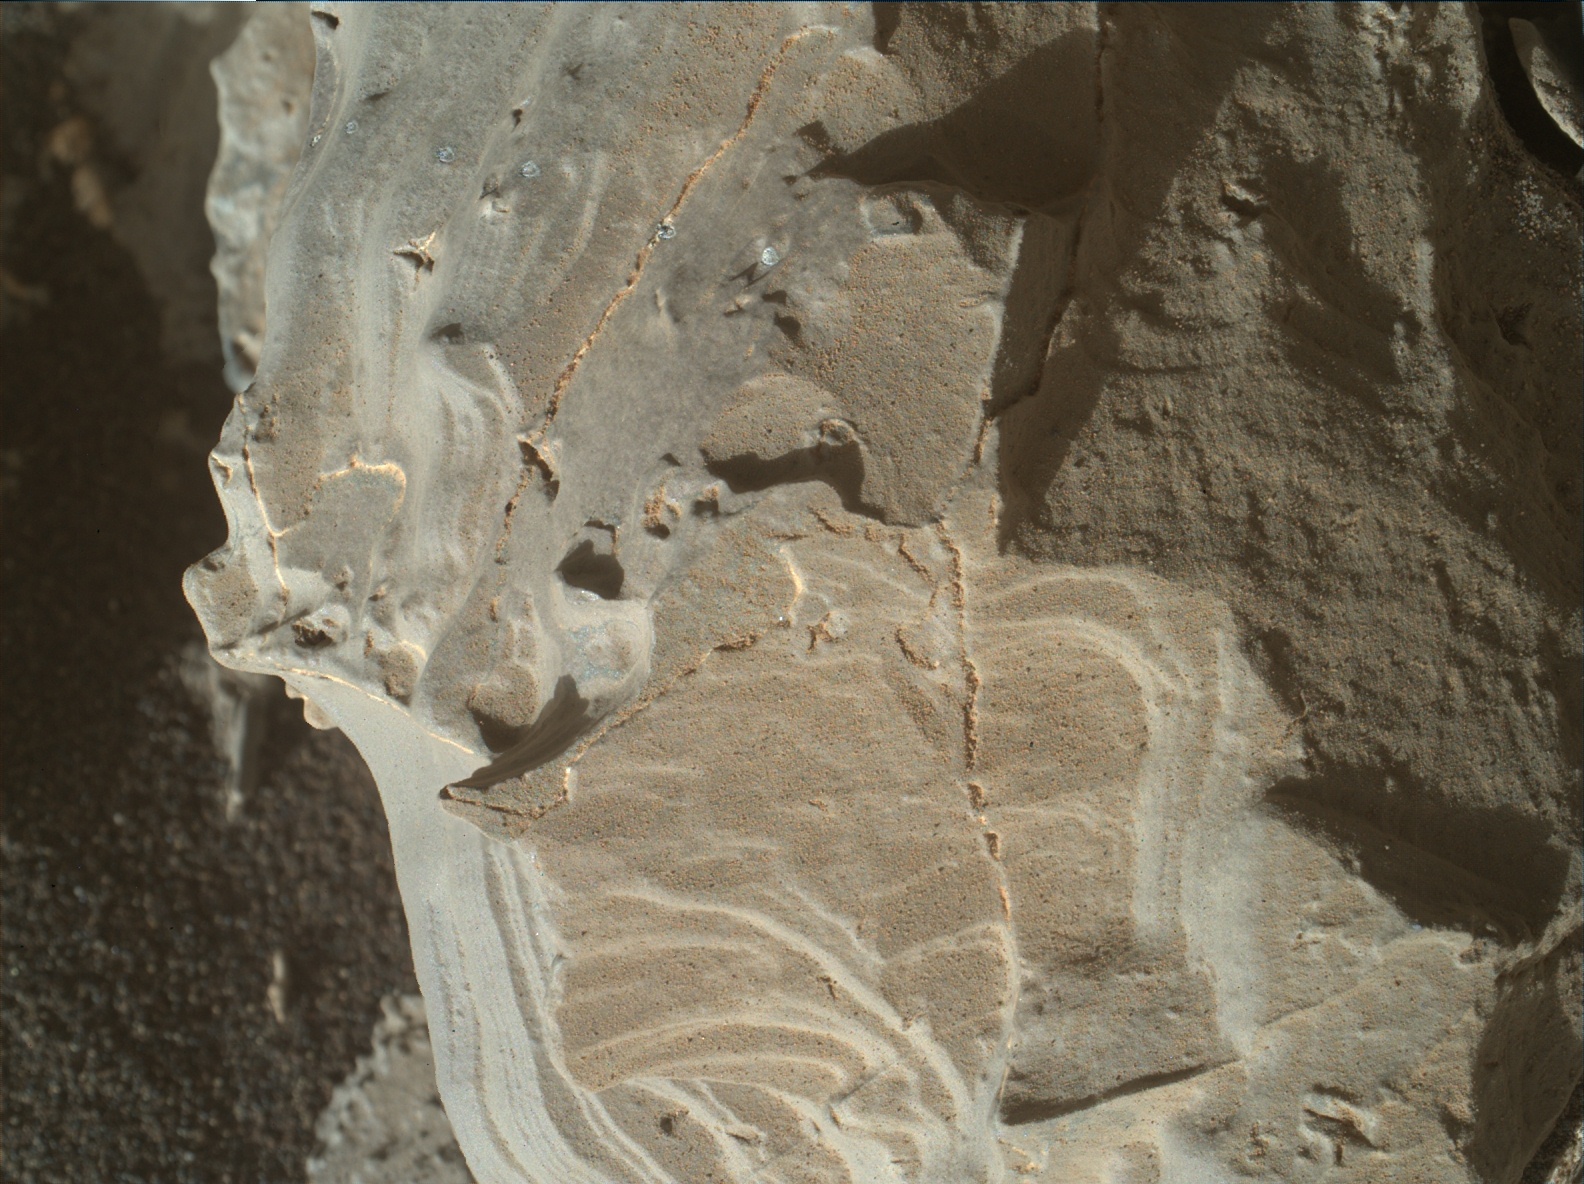 Nasa's Mars rover Curiosity acquired this image using its Mars Hand Lens Imager (MAHLI) on Sol 1939